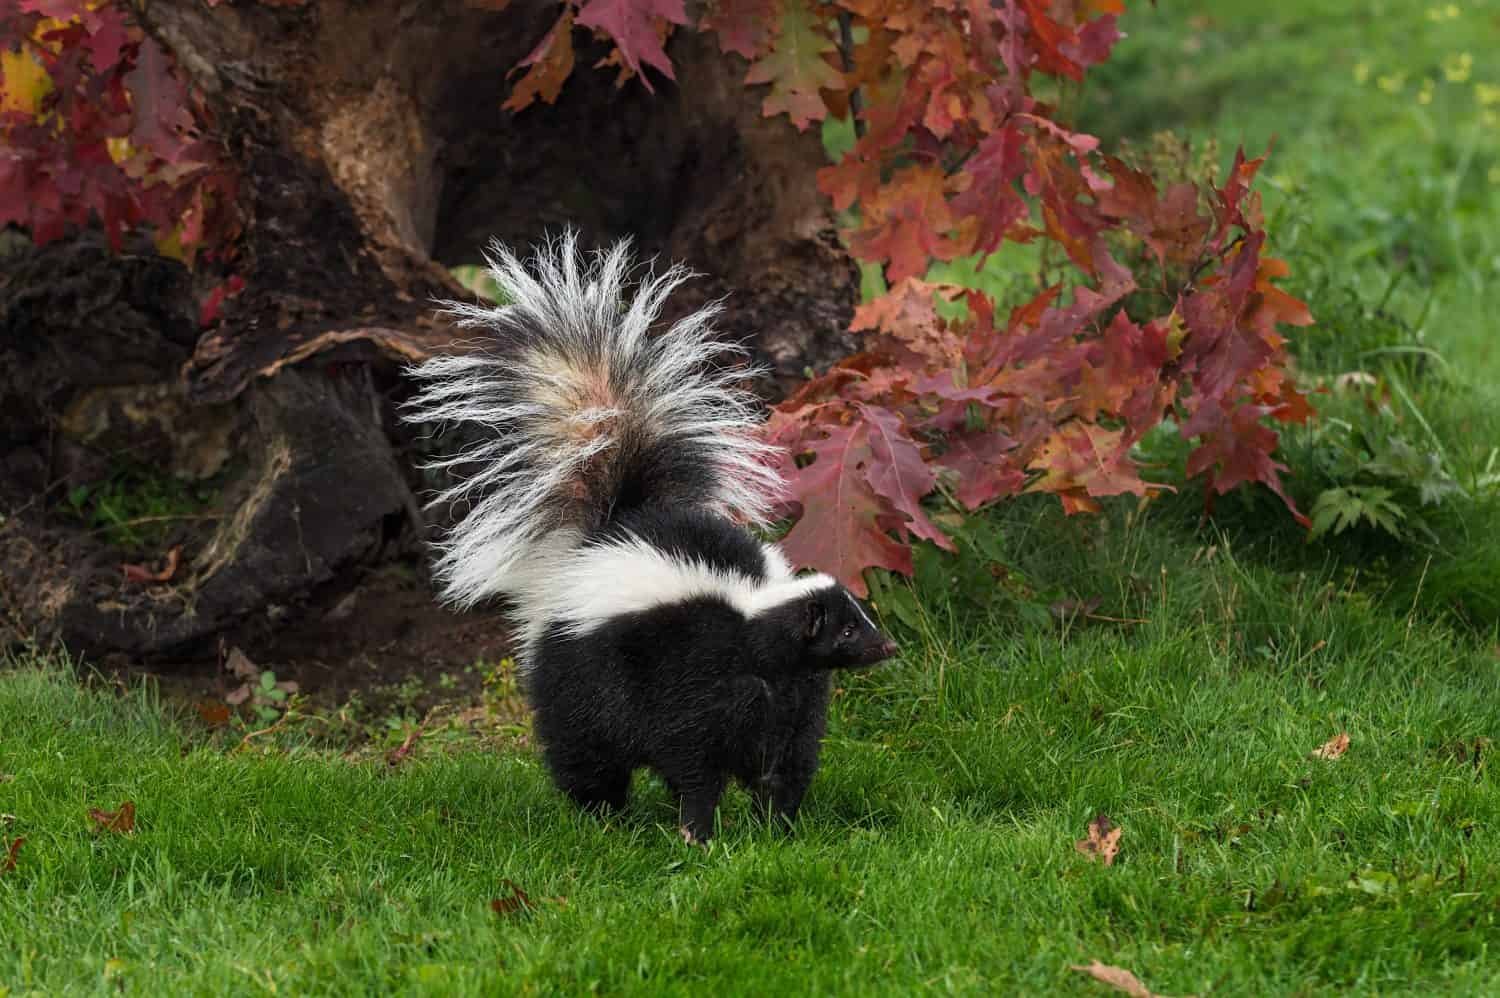 Striped Skunk (Mephitis mephitis) Tail Up By Fall Log - captive animal